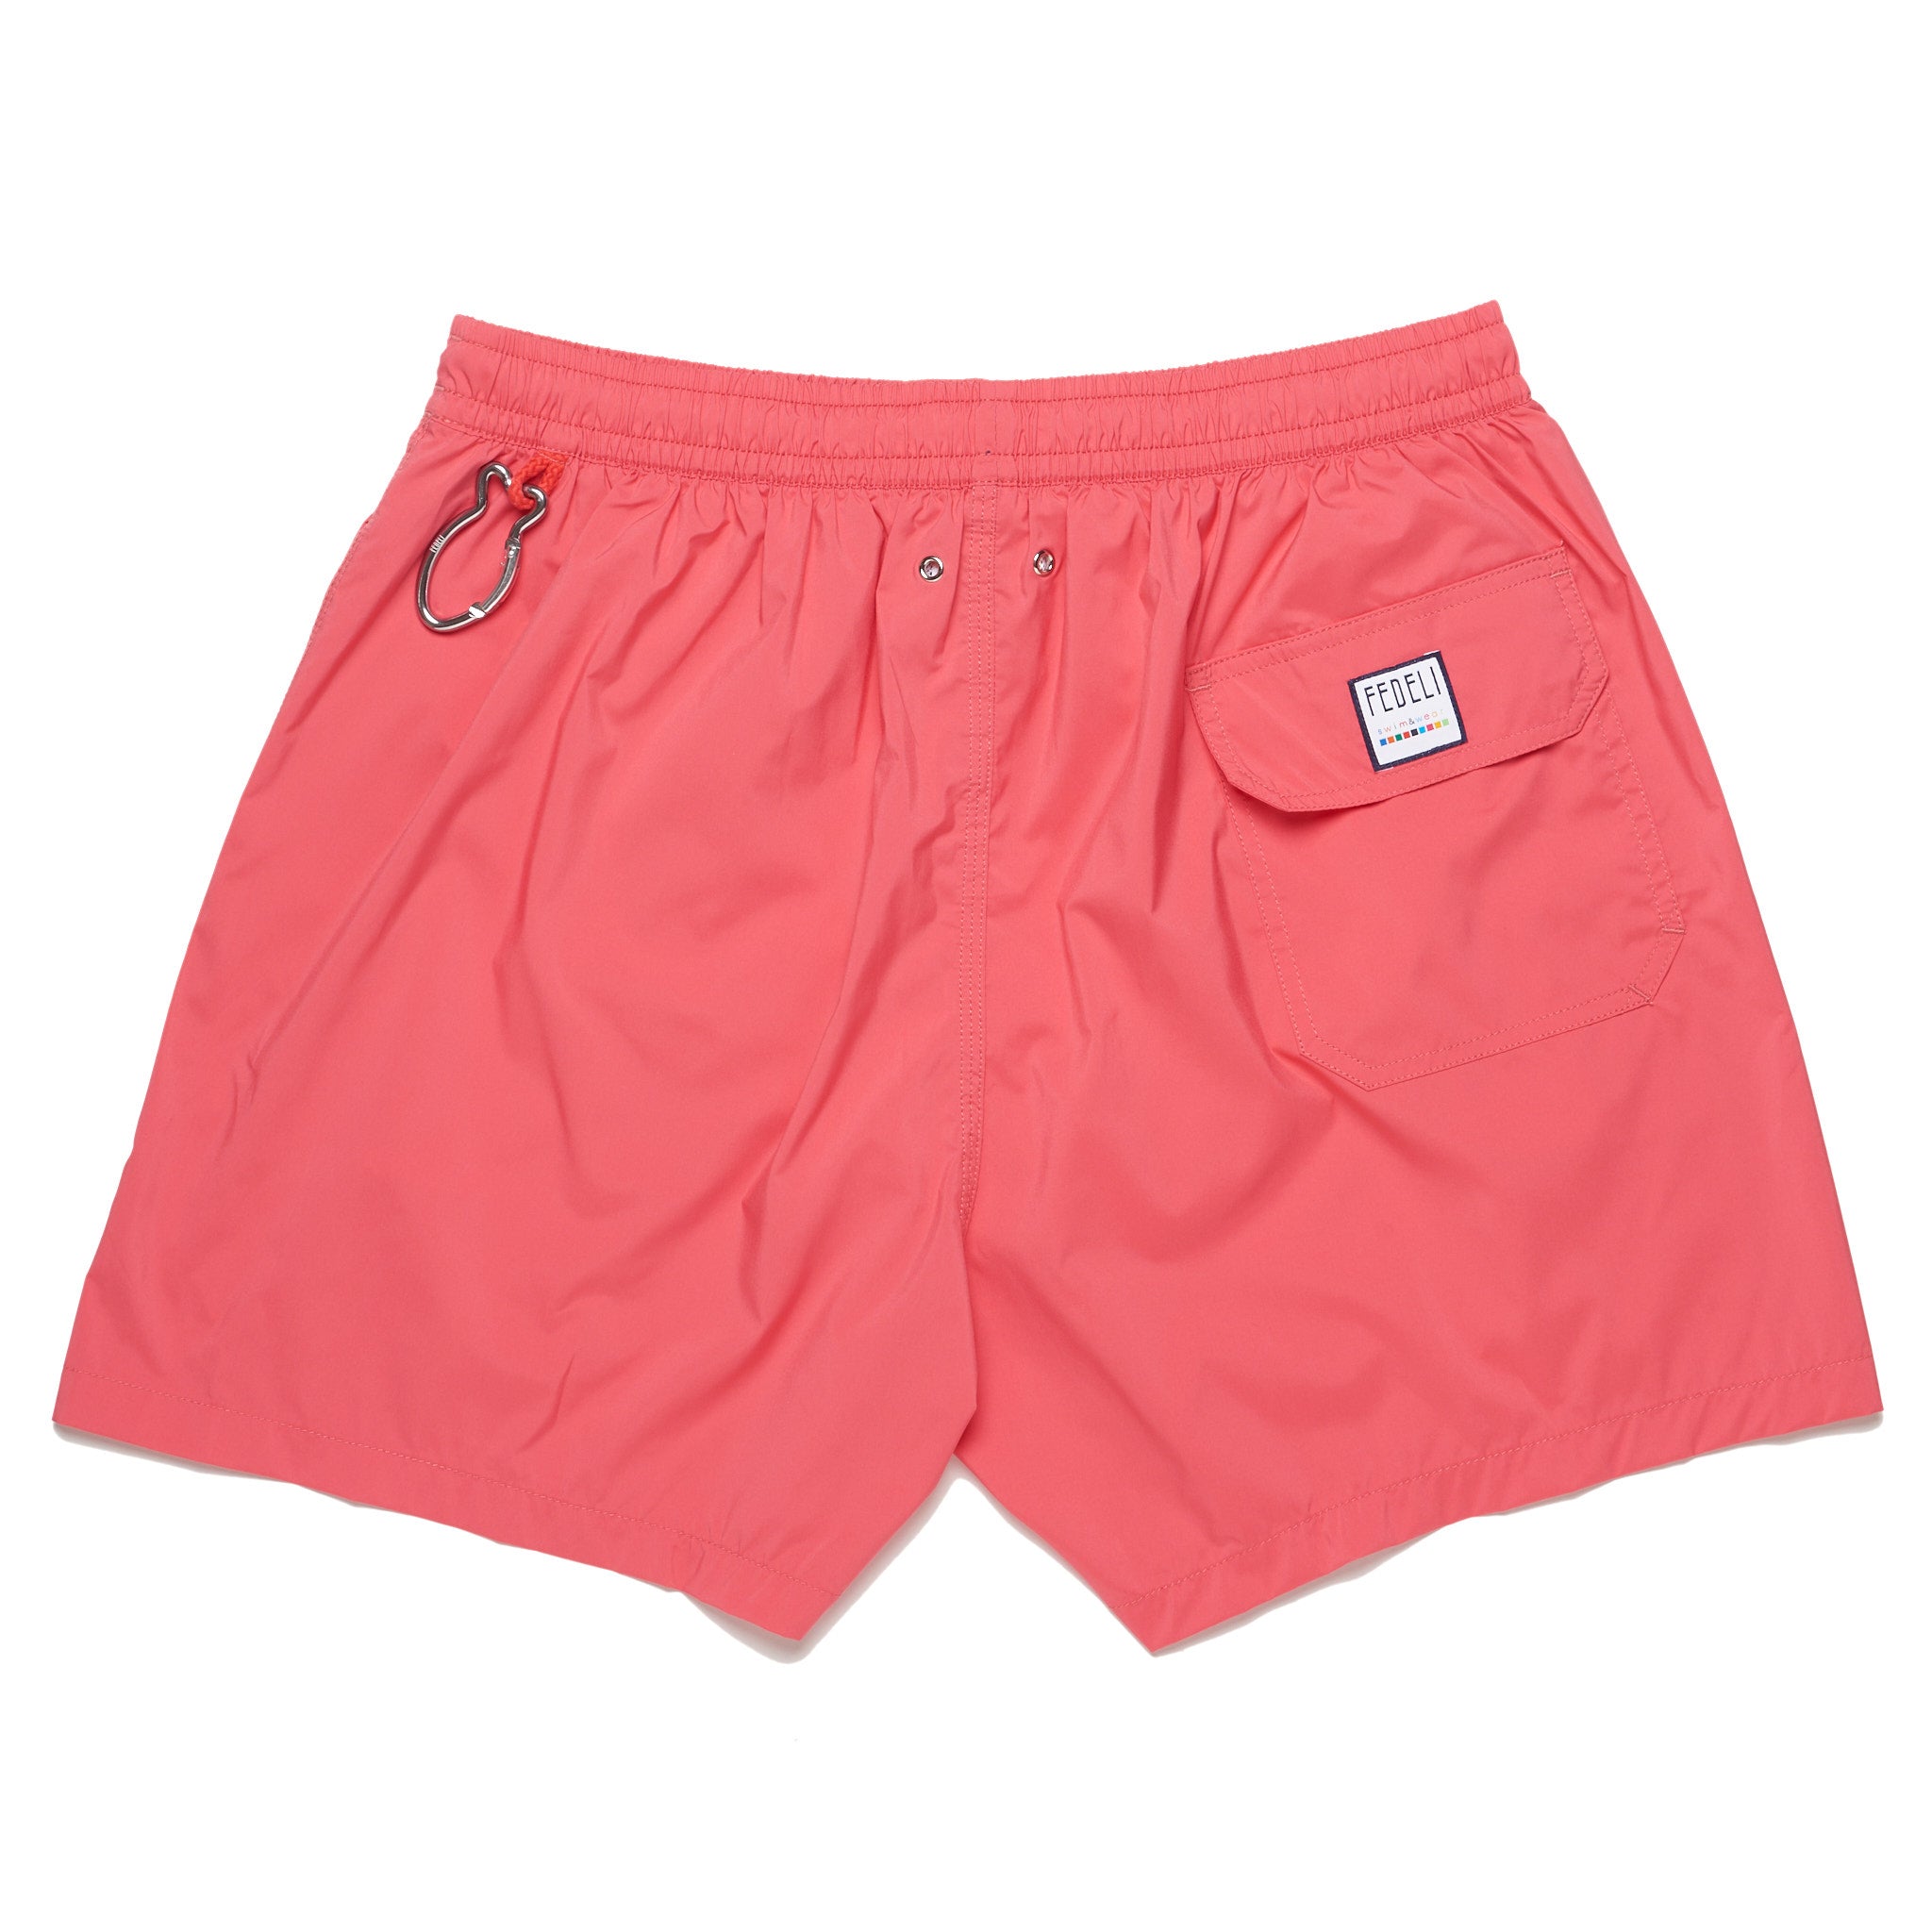 FEDELI Pink Madeira Airstop Swim Shorts Trunks NEW Size 2XL